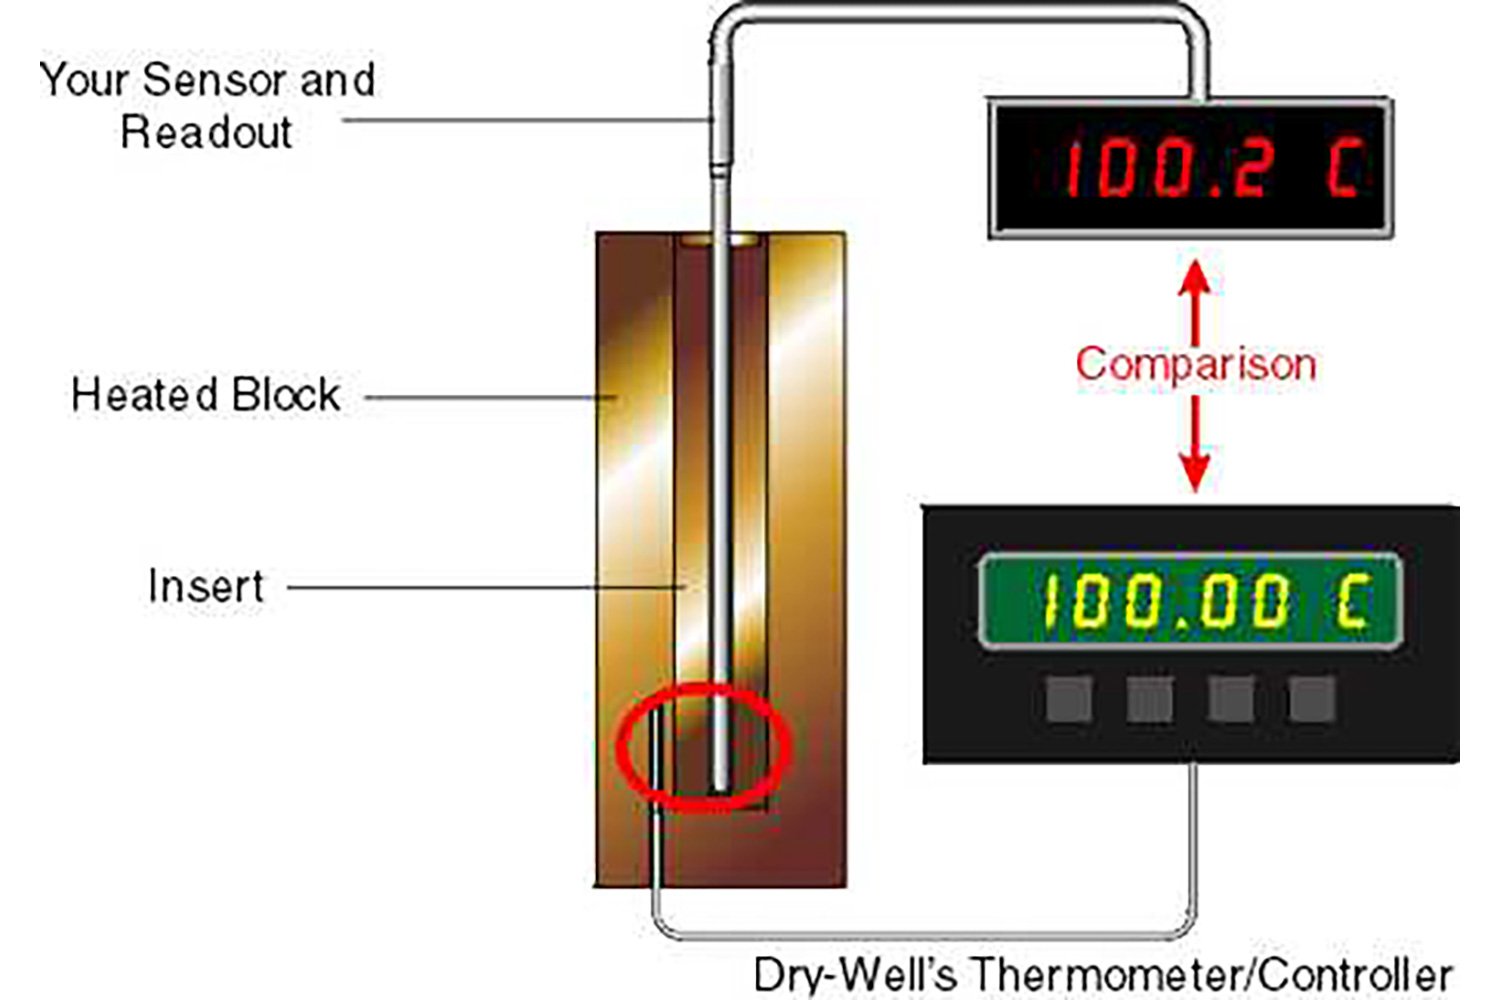 Comparing the temperature reading from the dry-well and a DUT.